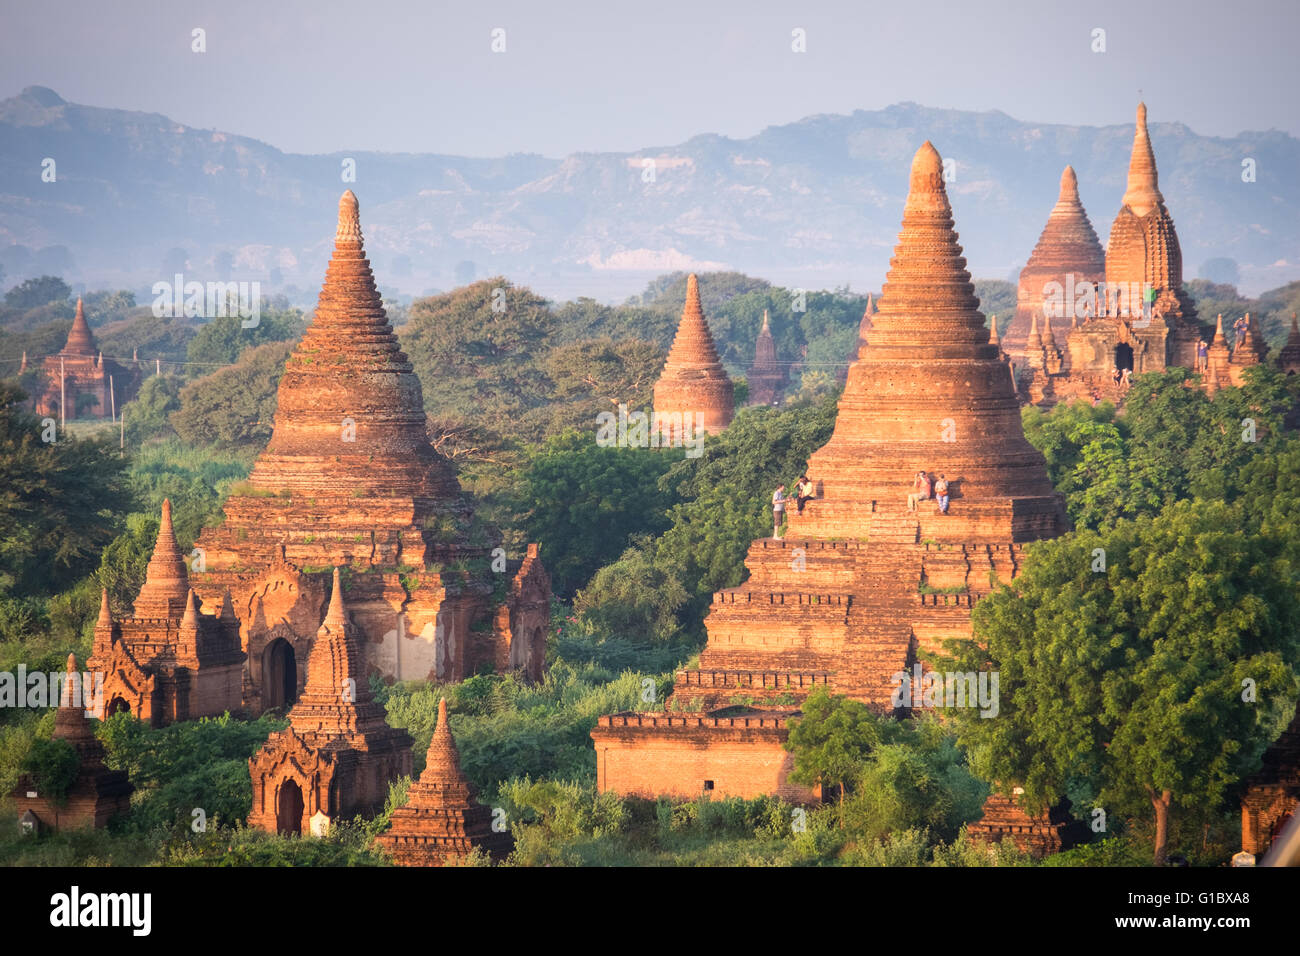 People watching the sunrise from temples in Bagan, Myanmar Stock Photo